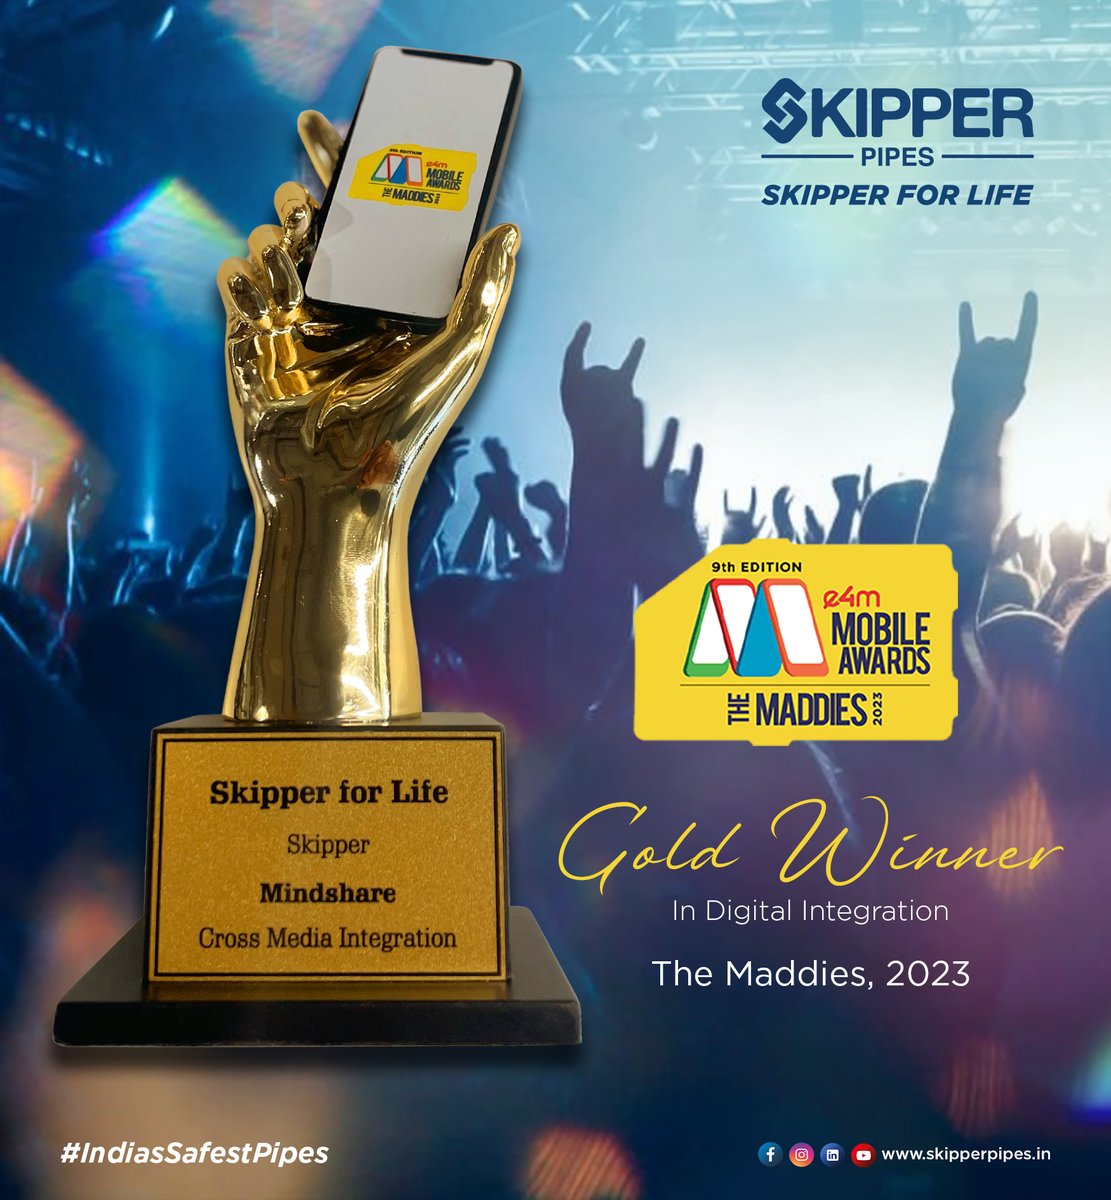 We won Gold for our digital campaign highlighting #SkipperForLife at 'The Maddies 2023'.

#e4mAwards #MobileMarketingAwards

#Skipper #TheMaddies #IndiasSafestPipes #SkipperPipes #LeadFree #LeadFreeWater #CPVC #CPVCPipes #LeadFreeCPVCPipes #CleanWater #SafeLiving #HealthyLiving